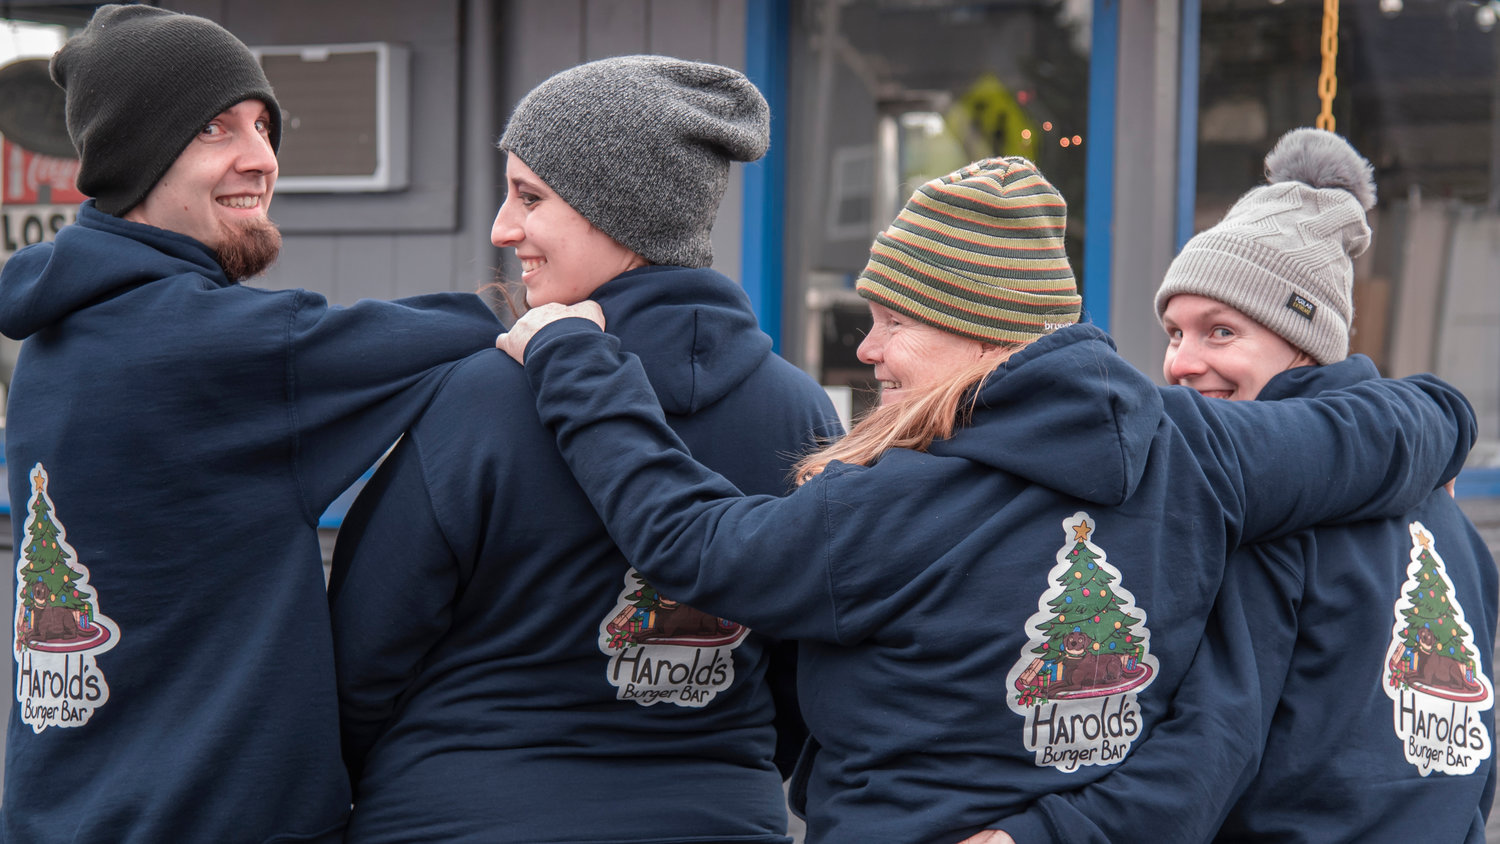 Harold’s Burger Bar staff smile and and embrace while showing off custom hoodies with Christmas themed logos in Centralia.